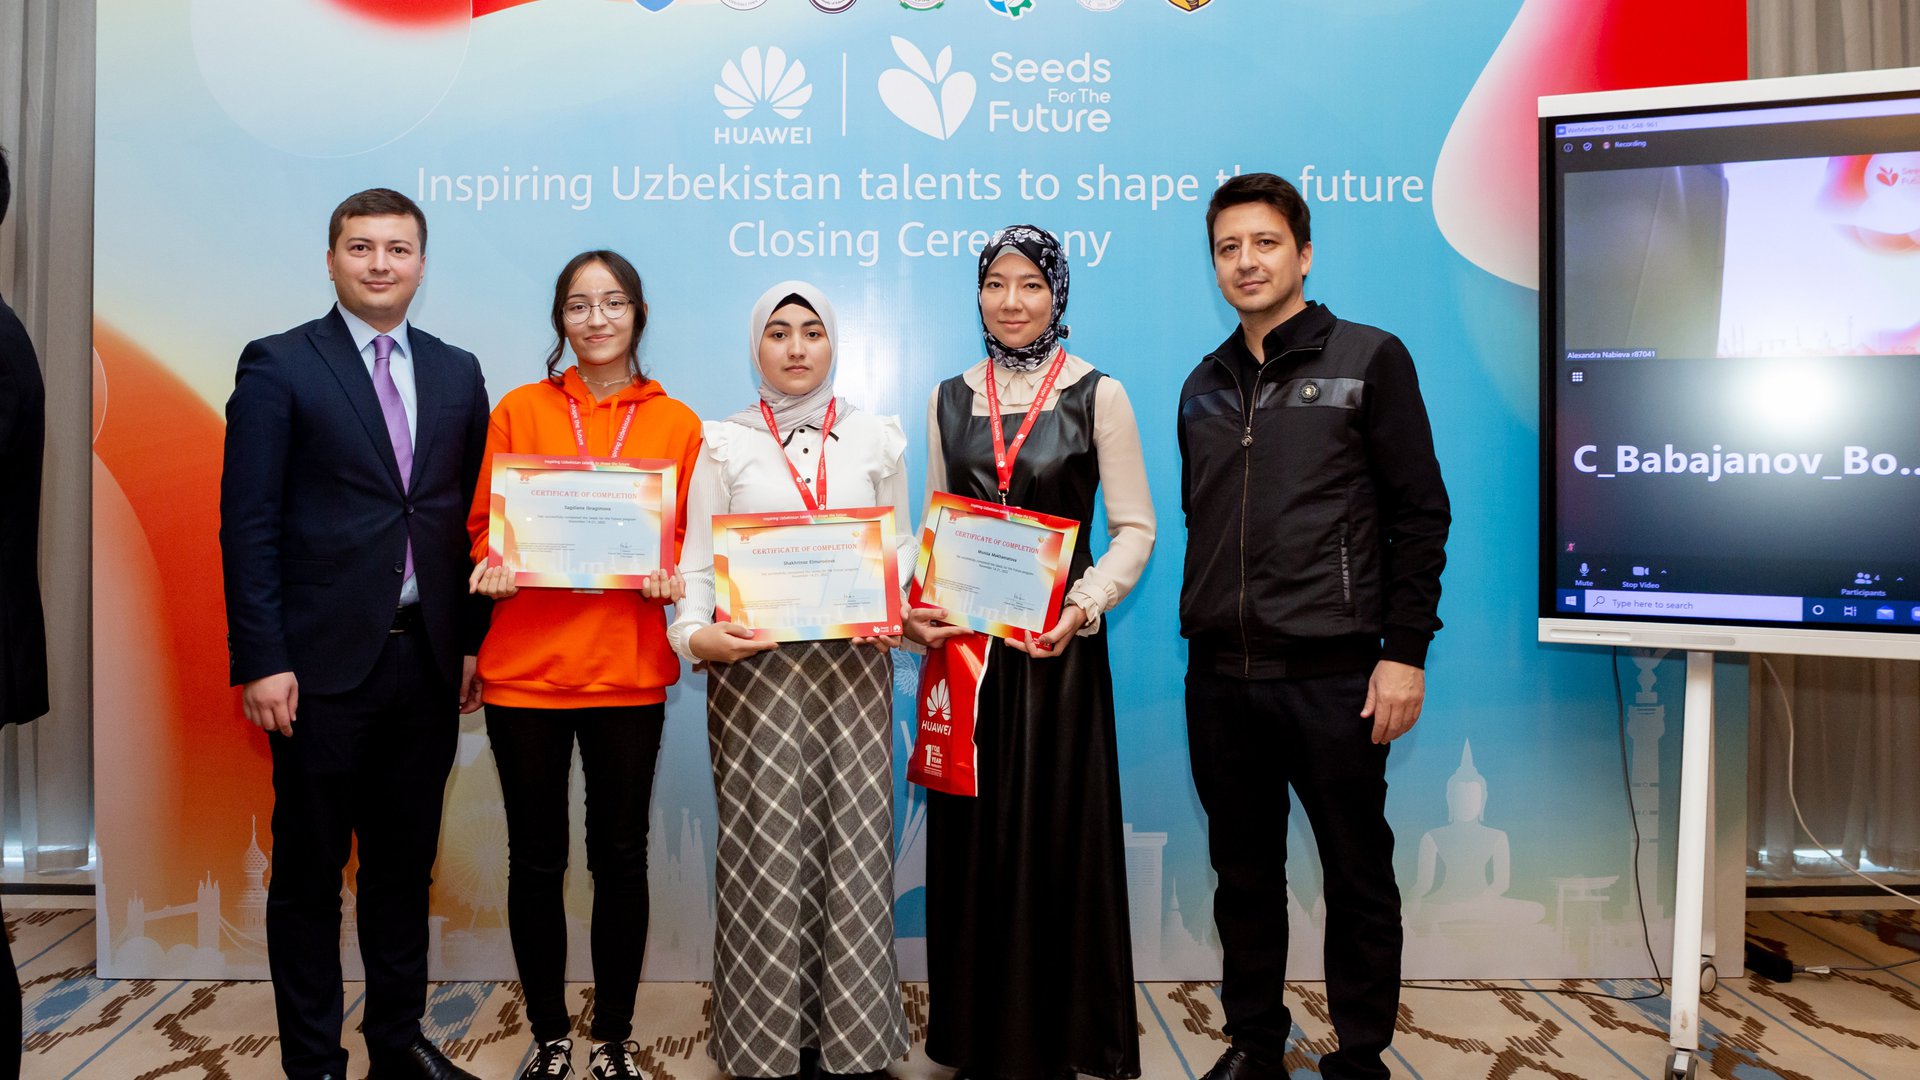 Closing ceremony of educational project Huawei "Seeds for the Future 2022" was held in Tashkent